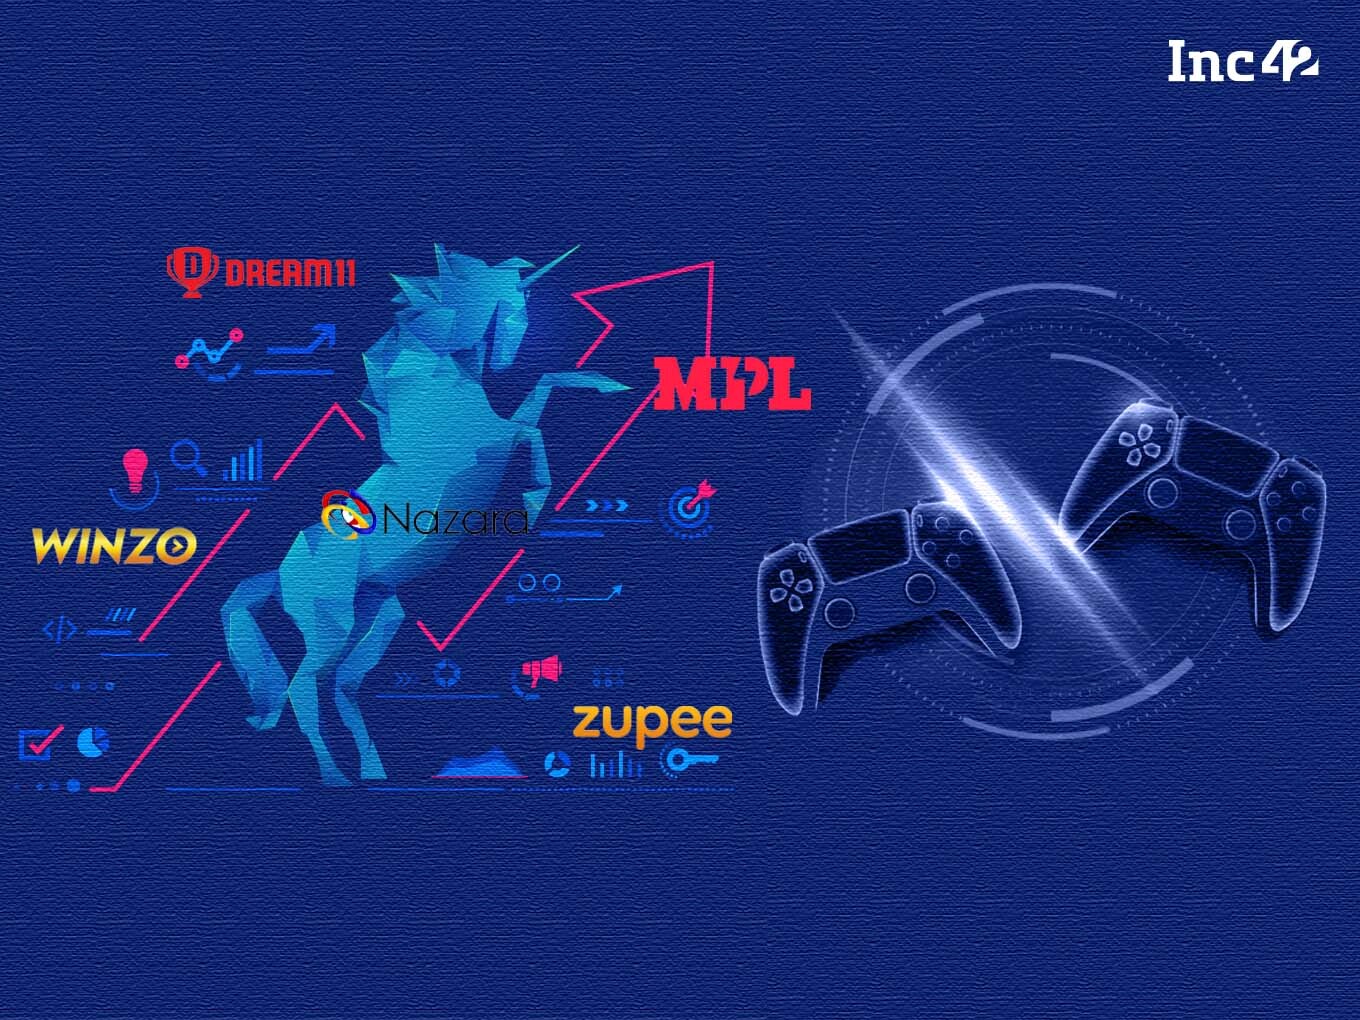 India To Have 10 Unicorns & 5 Decacorns From The Gaming Ecosystem In Next 5 Years: WinZo Founder